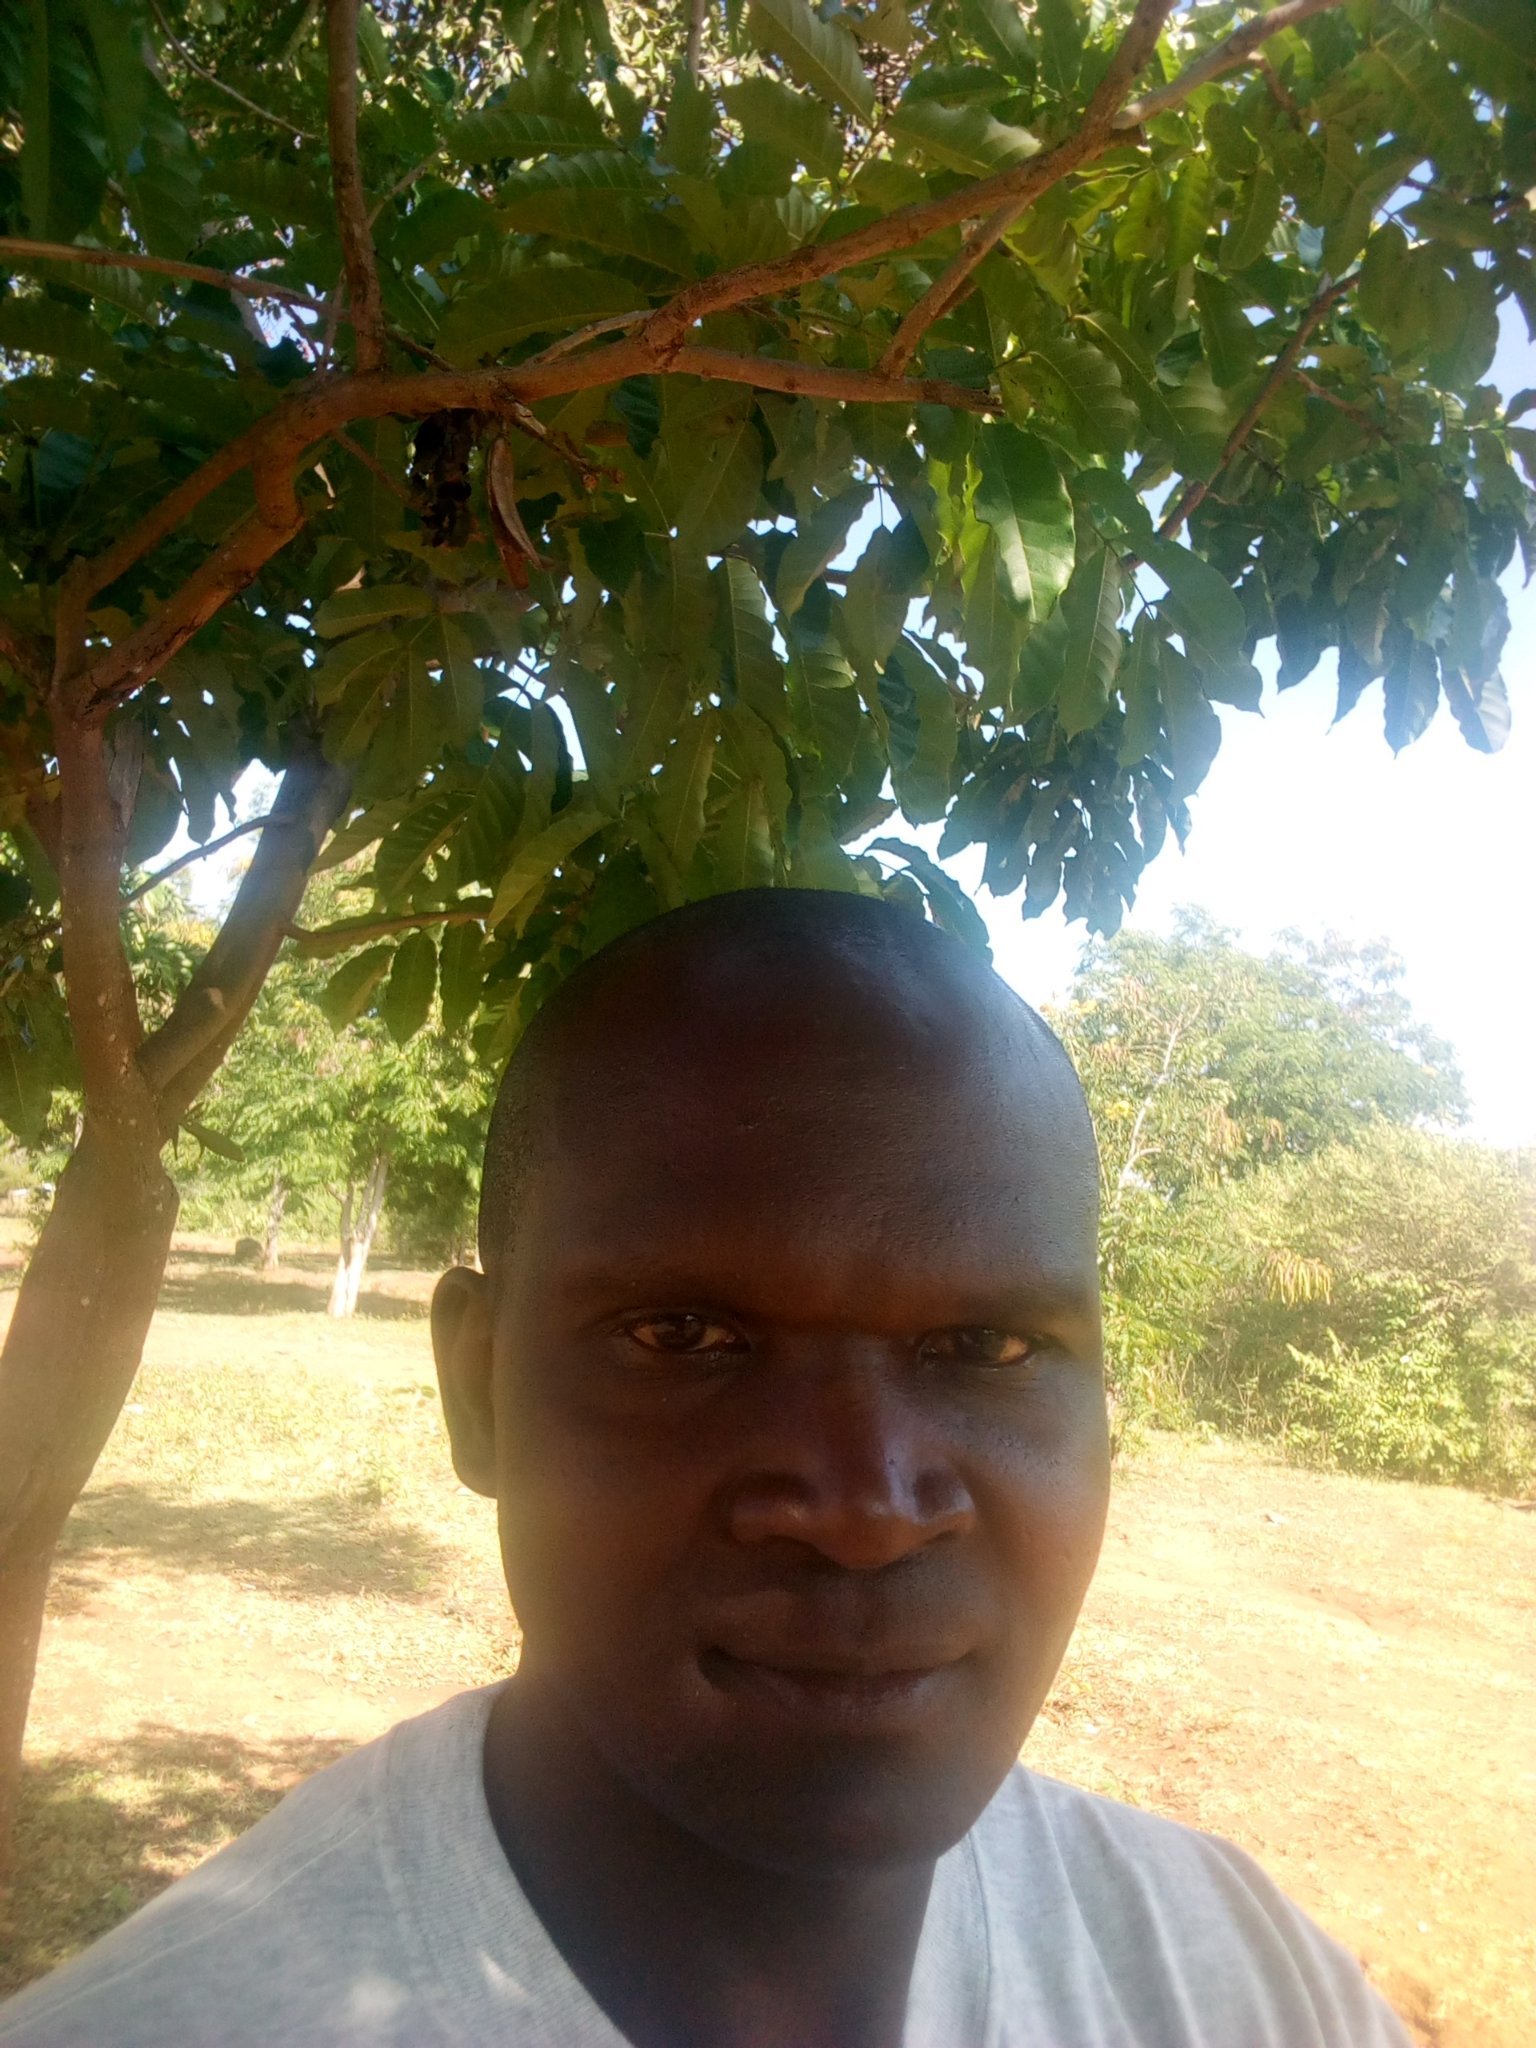 Born in 1978 at nyamira county, married with four kids, working with the national police service. I'm a funny of driving, riding, reading novels, story telling